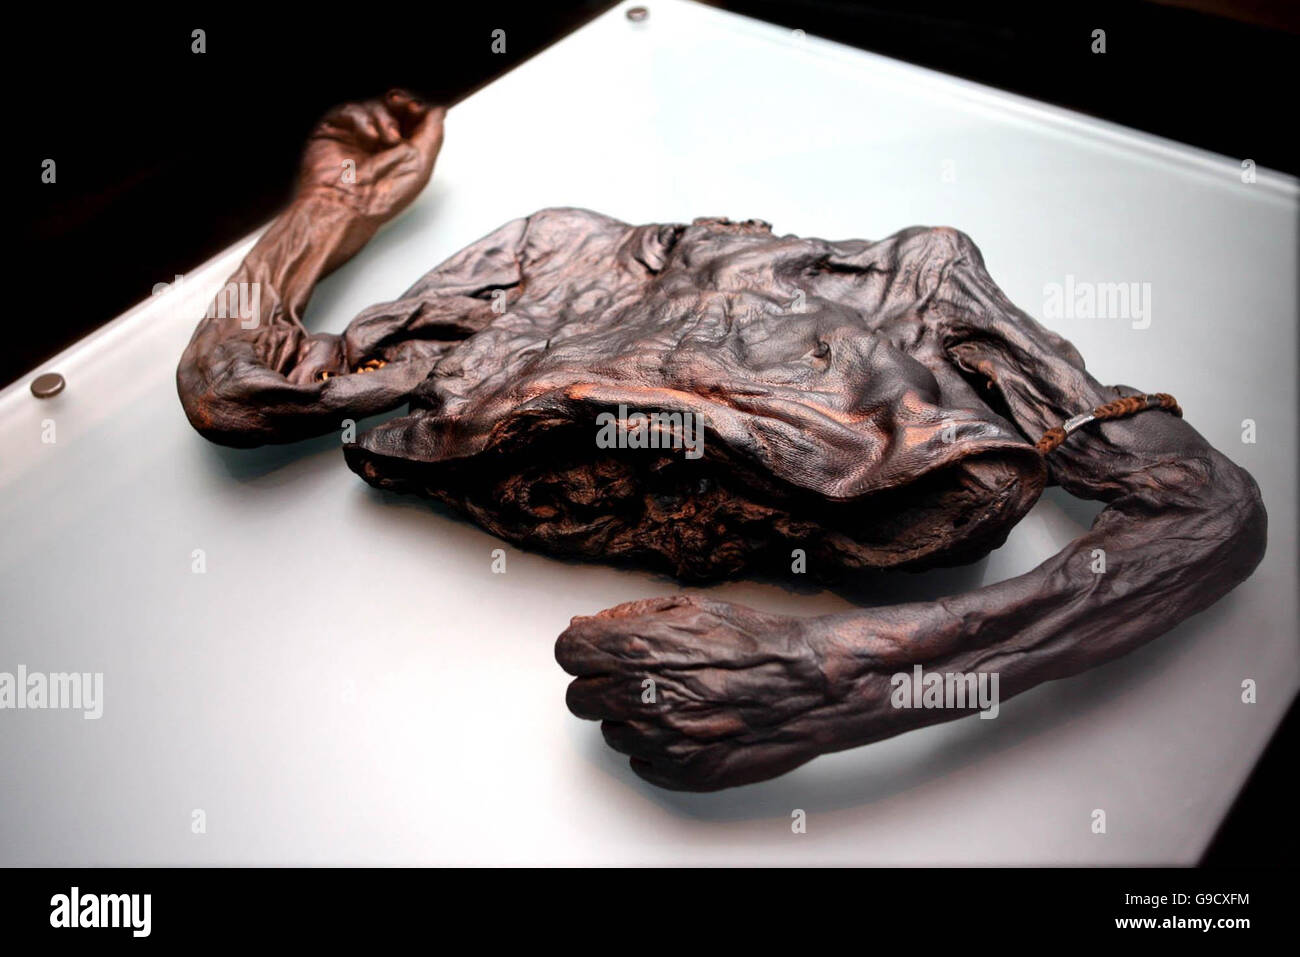 The remains of Oldcroghan Man uncovered in may 2003 in Co Offaly, part of a major new exhibition at the National Museum of Ireland in Kildare Street, Dublin, entitled 'Kingship & Sacrfice - An exhibition of bog bodies and related finds' . Stock Photo